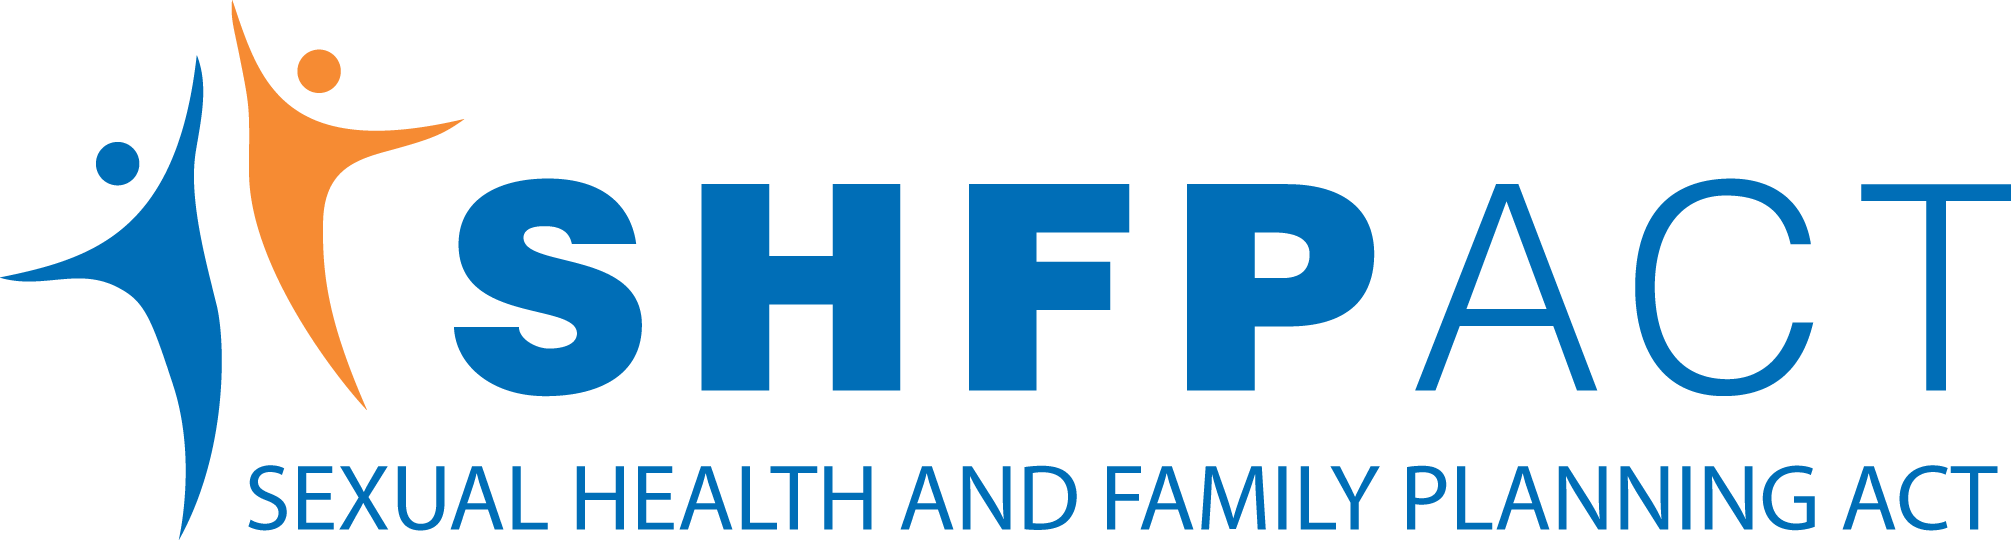 Sexual Health and Family Planning